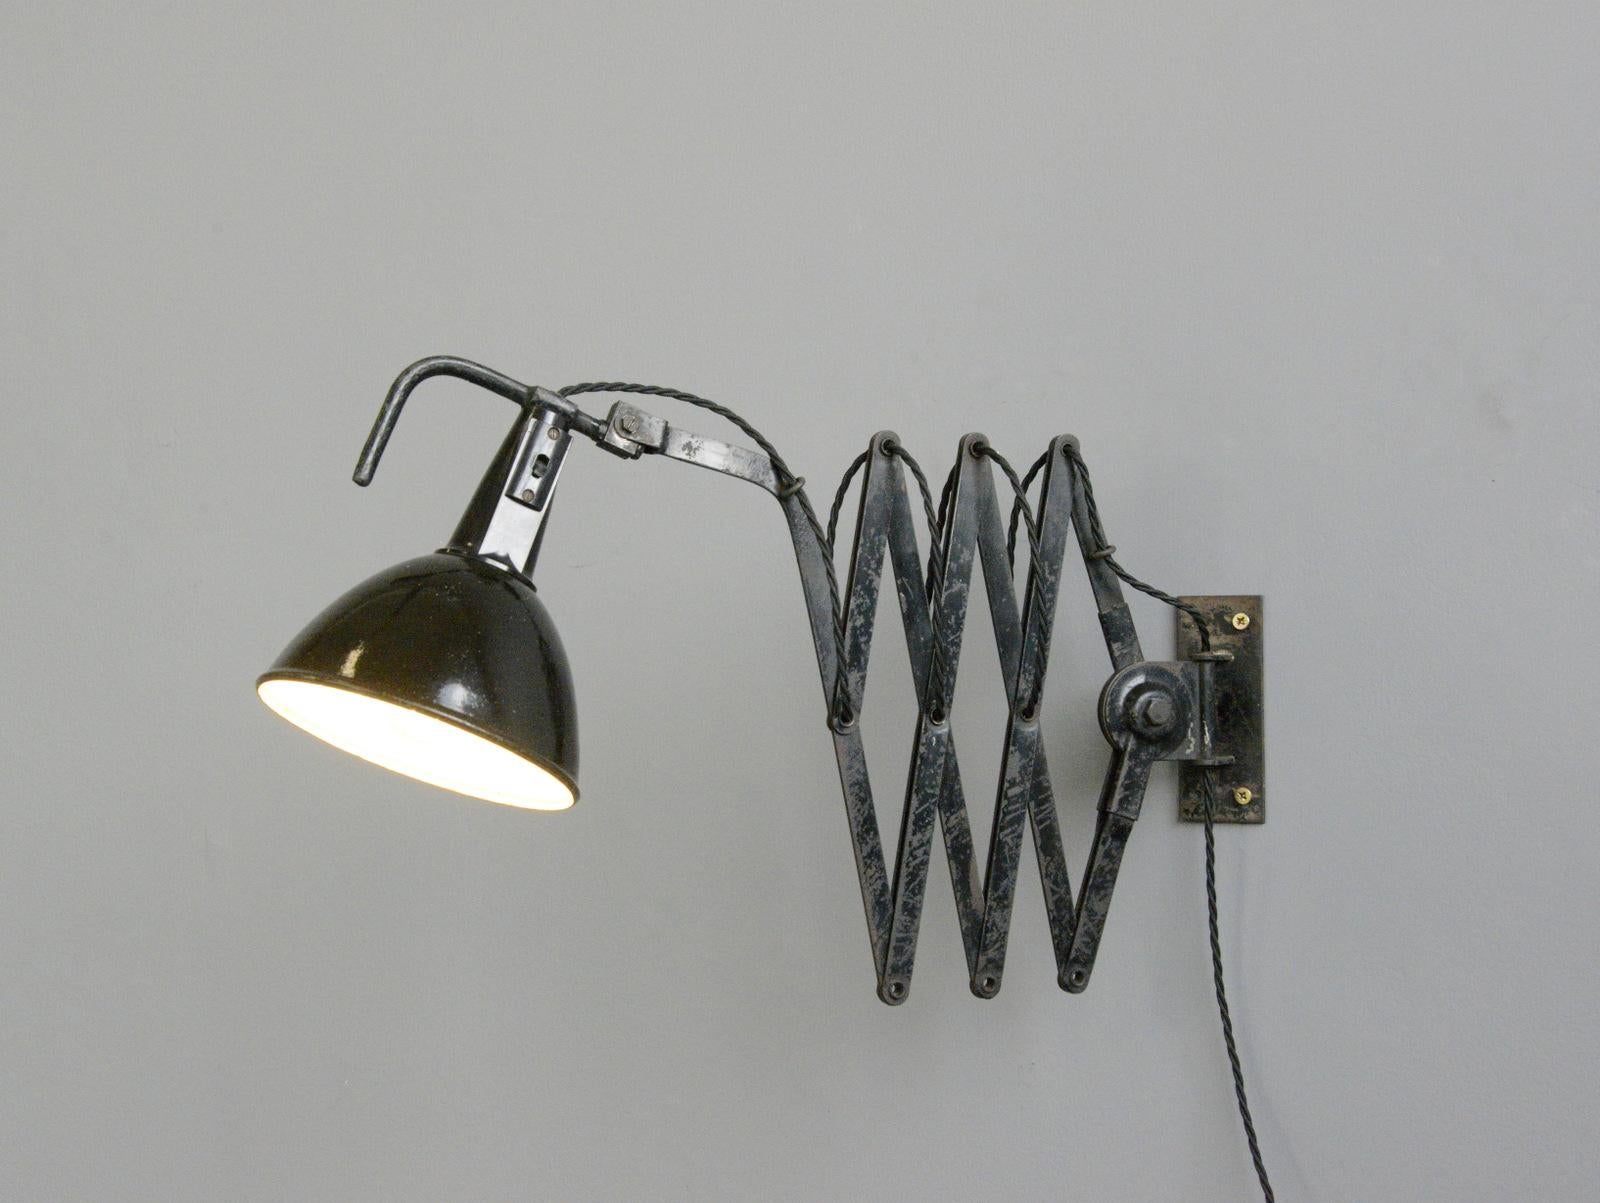 Modernist scissor lamp by Wilhelm Bader, Circa 1930s

- Large extendable scissor mechanism 
- Original On/Off switches 
- Takes E27 fitting bulbs
- German ~ 1930s
- Extends up to 115cm from the wall
- 18cm wide x 25cm tall

Condition